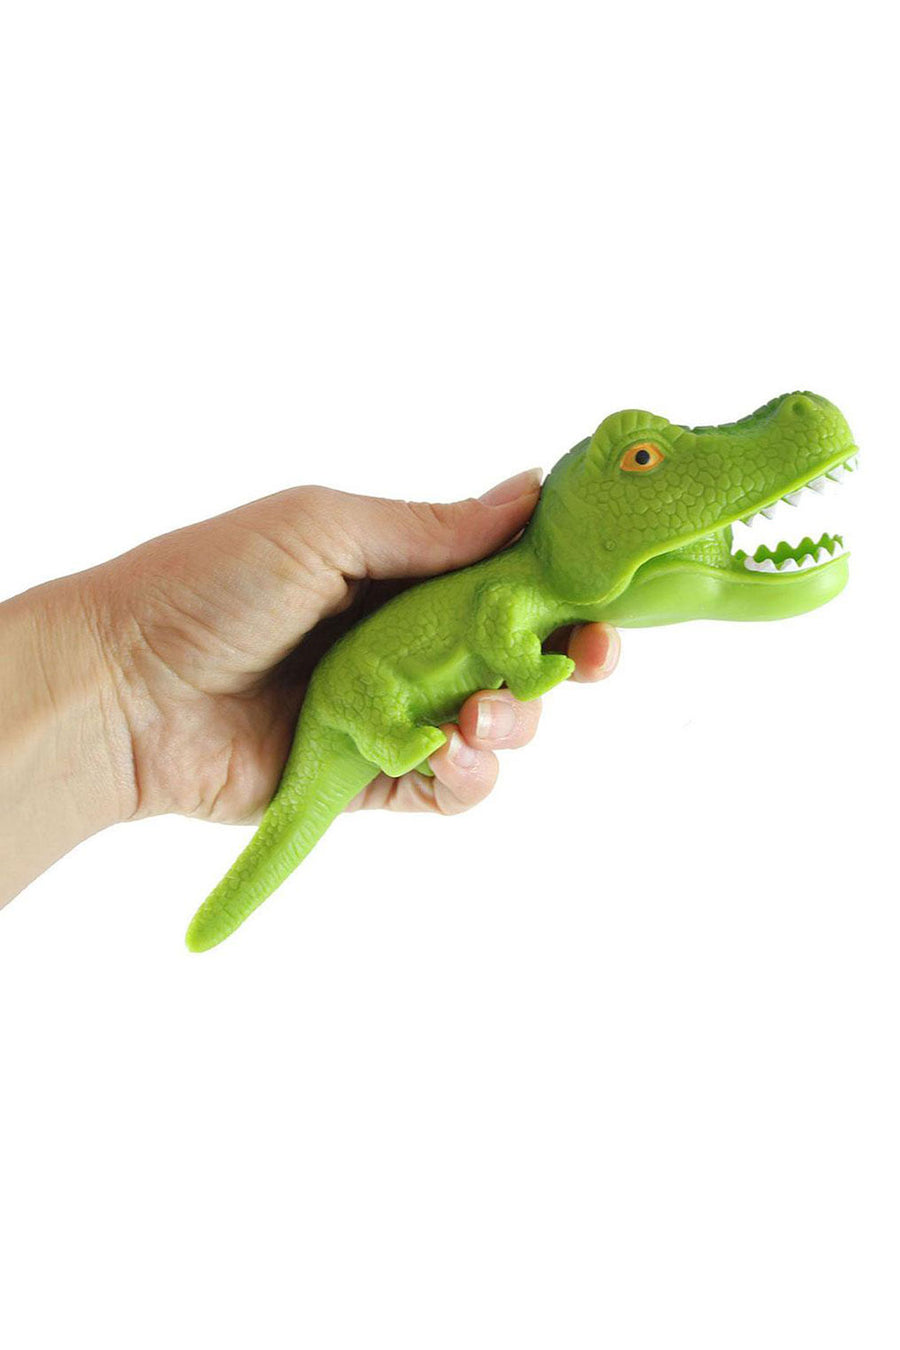 Sand Filled Squishy Alligator - Moldable Sensory, Stress, Squeeze Fidget - Vacay Land 